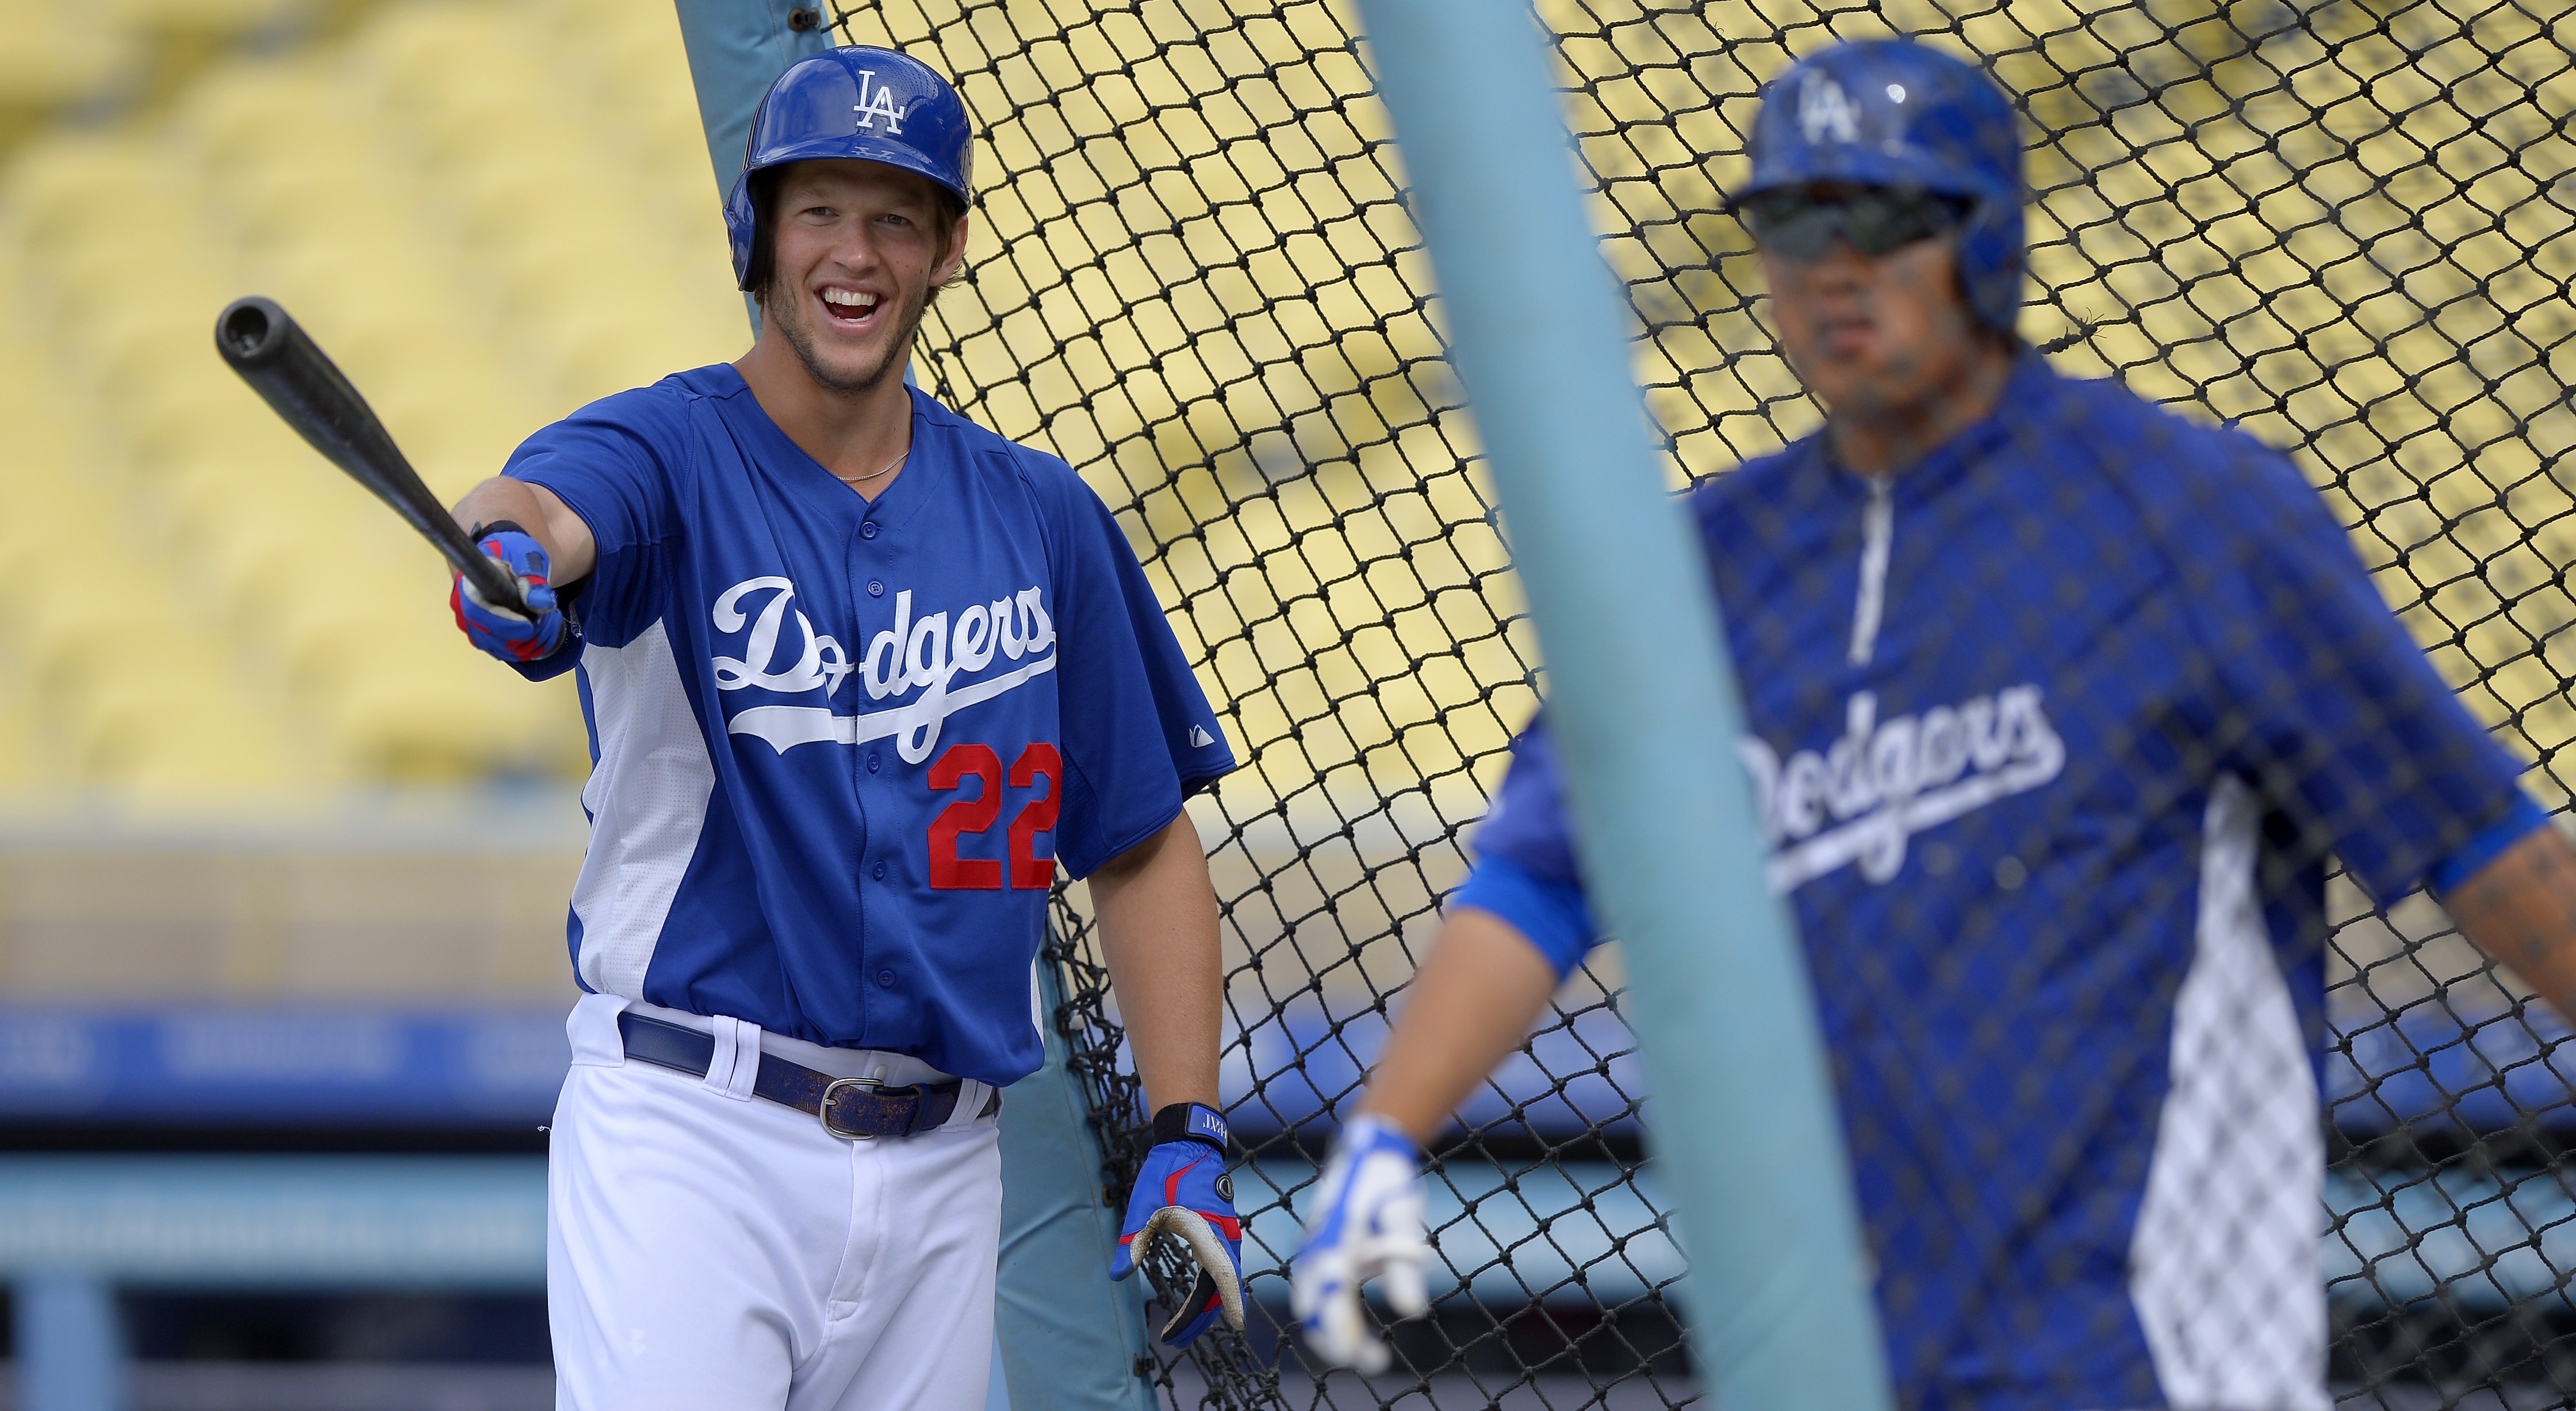 Clayton Kershaw. left, during batting practice with Ryu Hyun-jin here, has a lot to smile about. (AP)